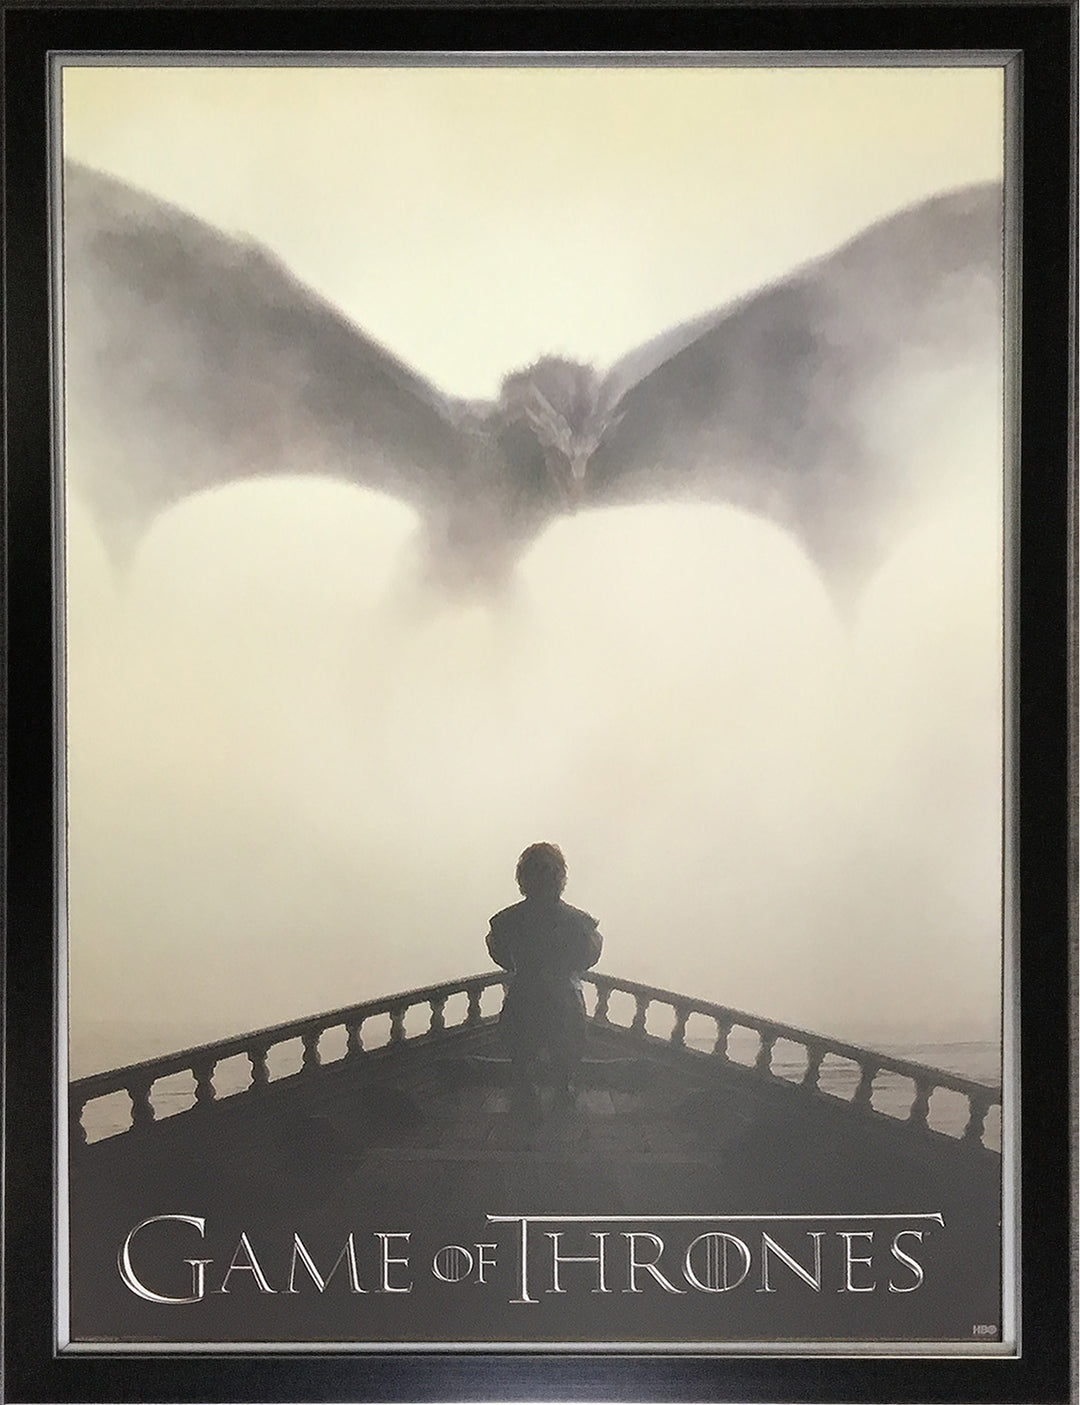 Game Of Thrones - Museum Framed Poster Of Dragon, Game of Thrones, Hollywood, Movie and Television, Collectibile Memorabilia, AAOCM32055